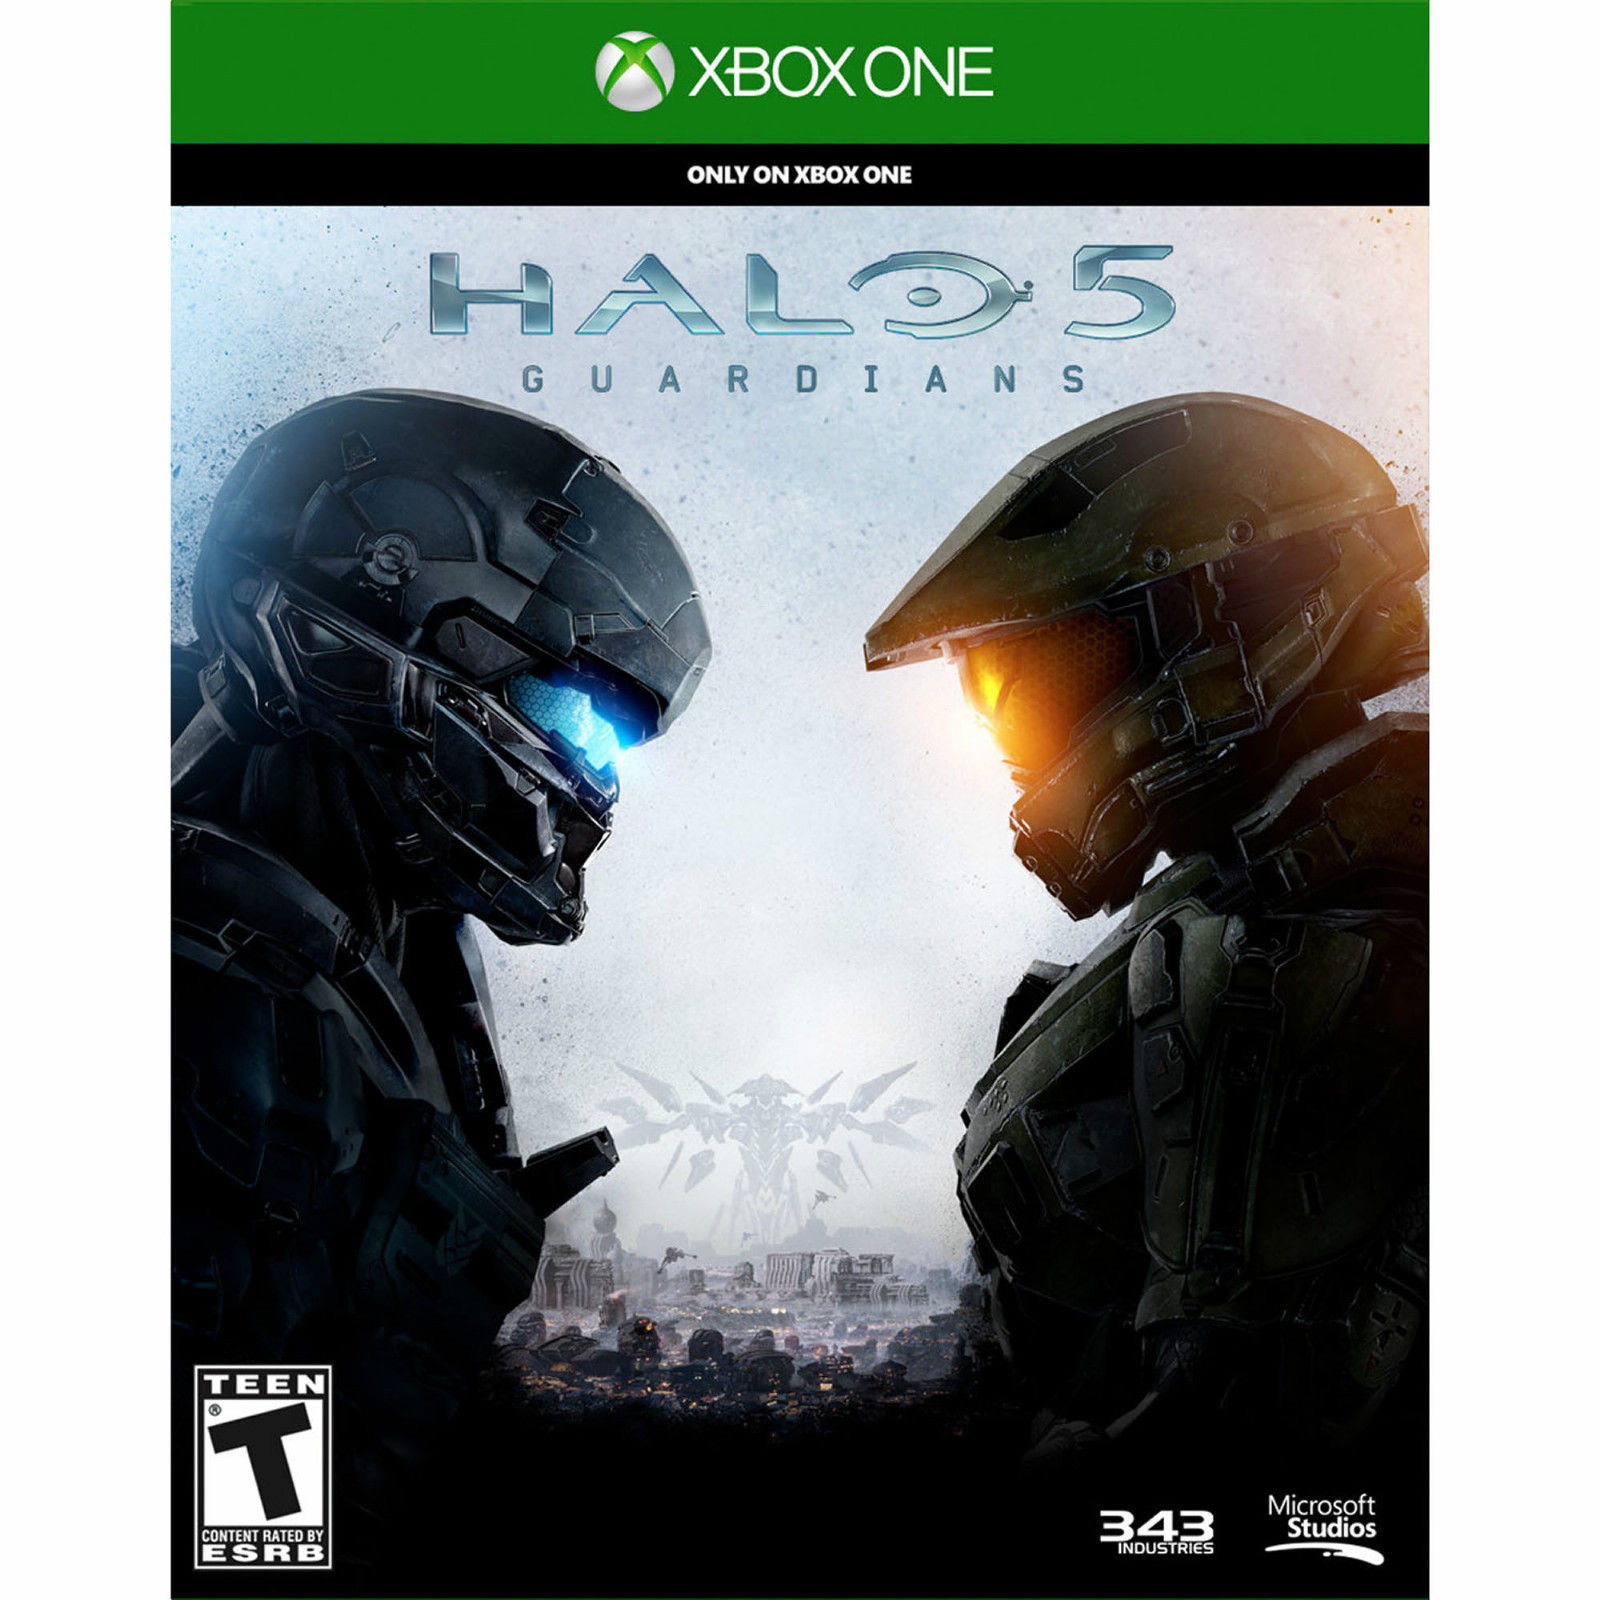 Halo 5 Guardians Xbox One XboxOne DISPATCH TODAY ALL ORDERS BY 2PM